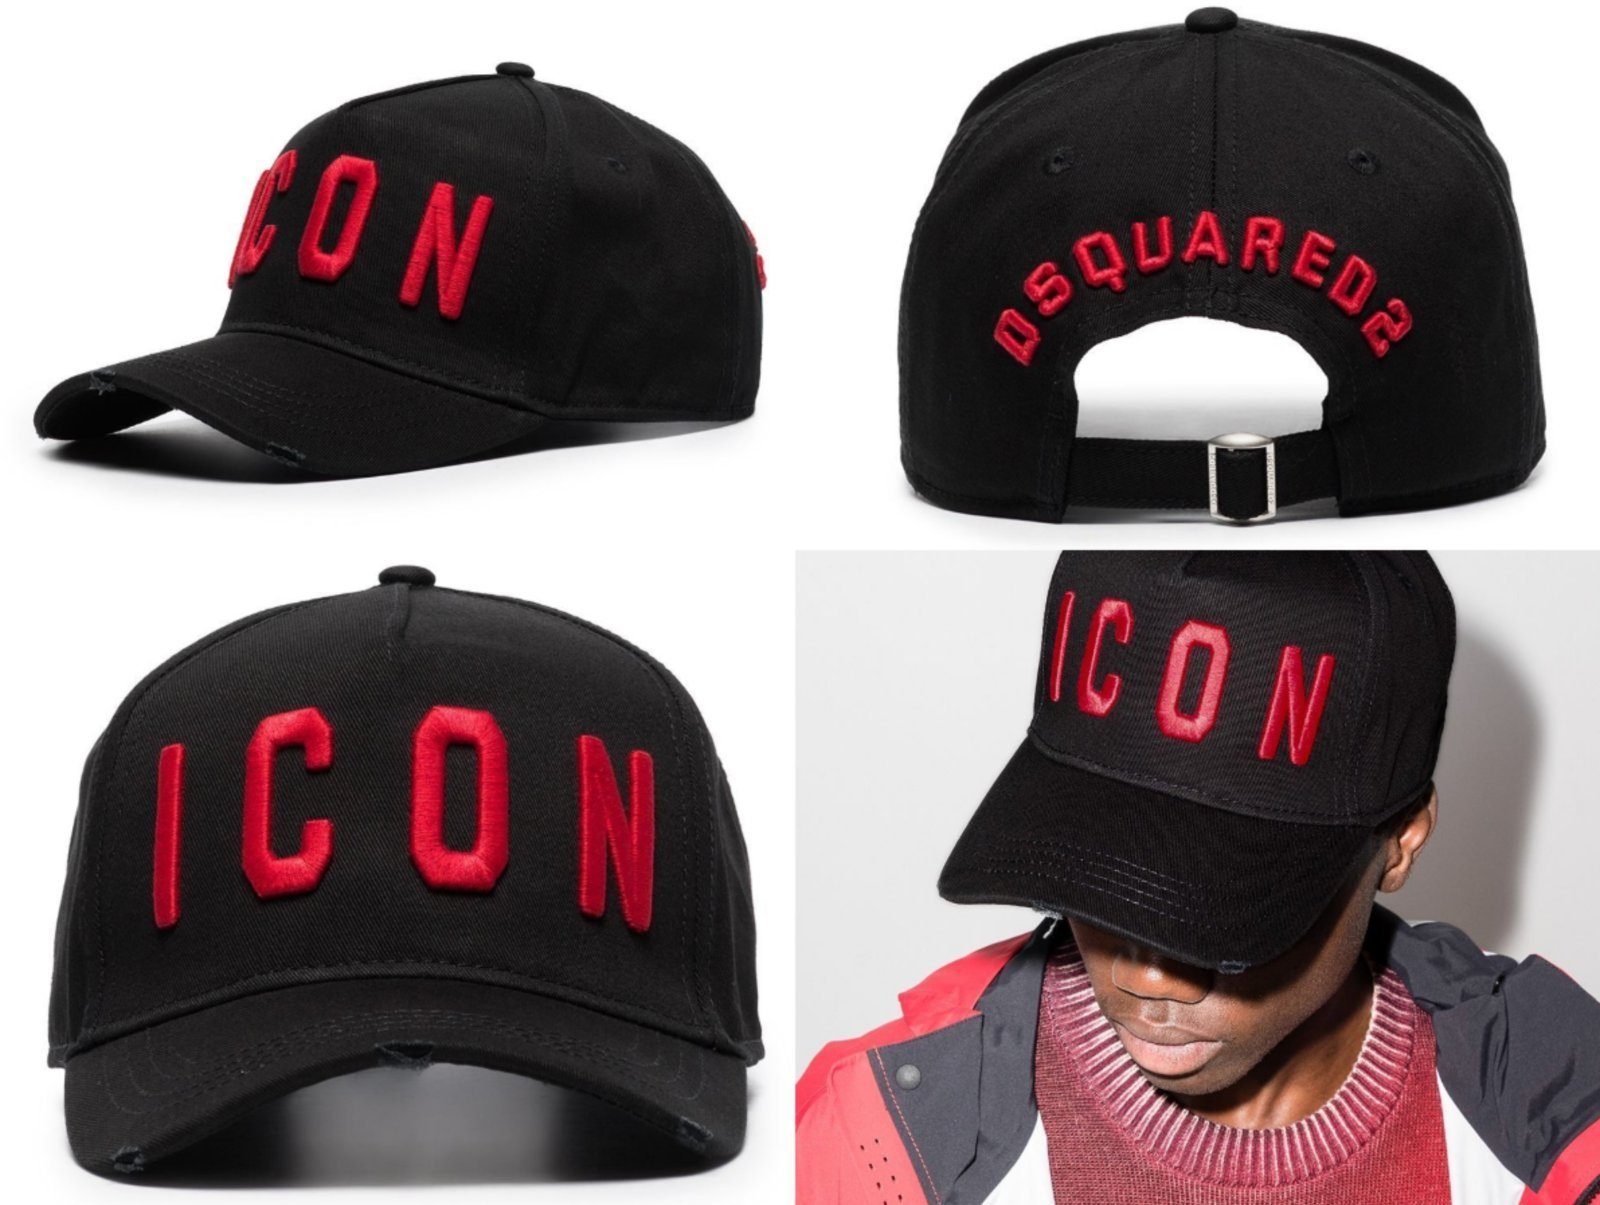 CAP VINTAGE HAT DSQUARED2 CAPPY Baseball ICON Cap LOGO Dsquared2 EMBROIDERED BLACK BASEBALL